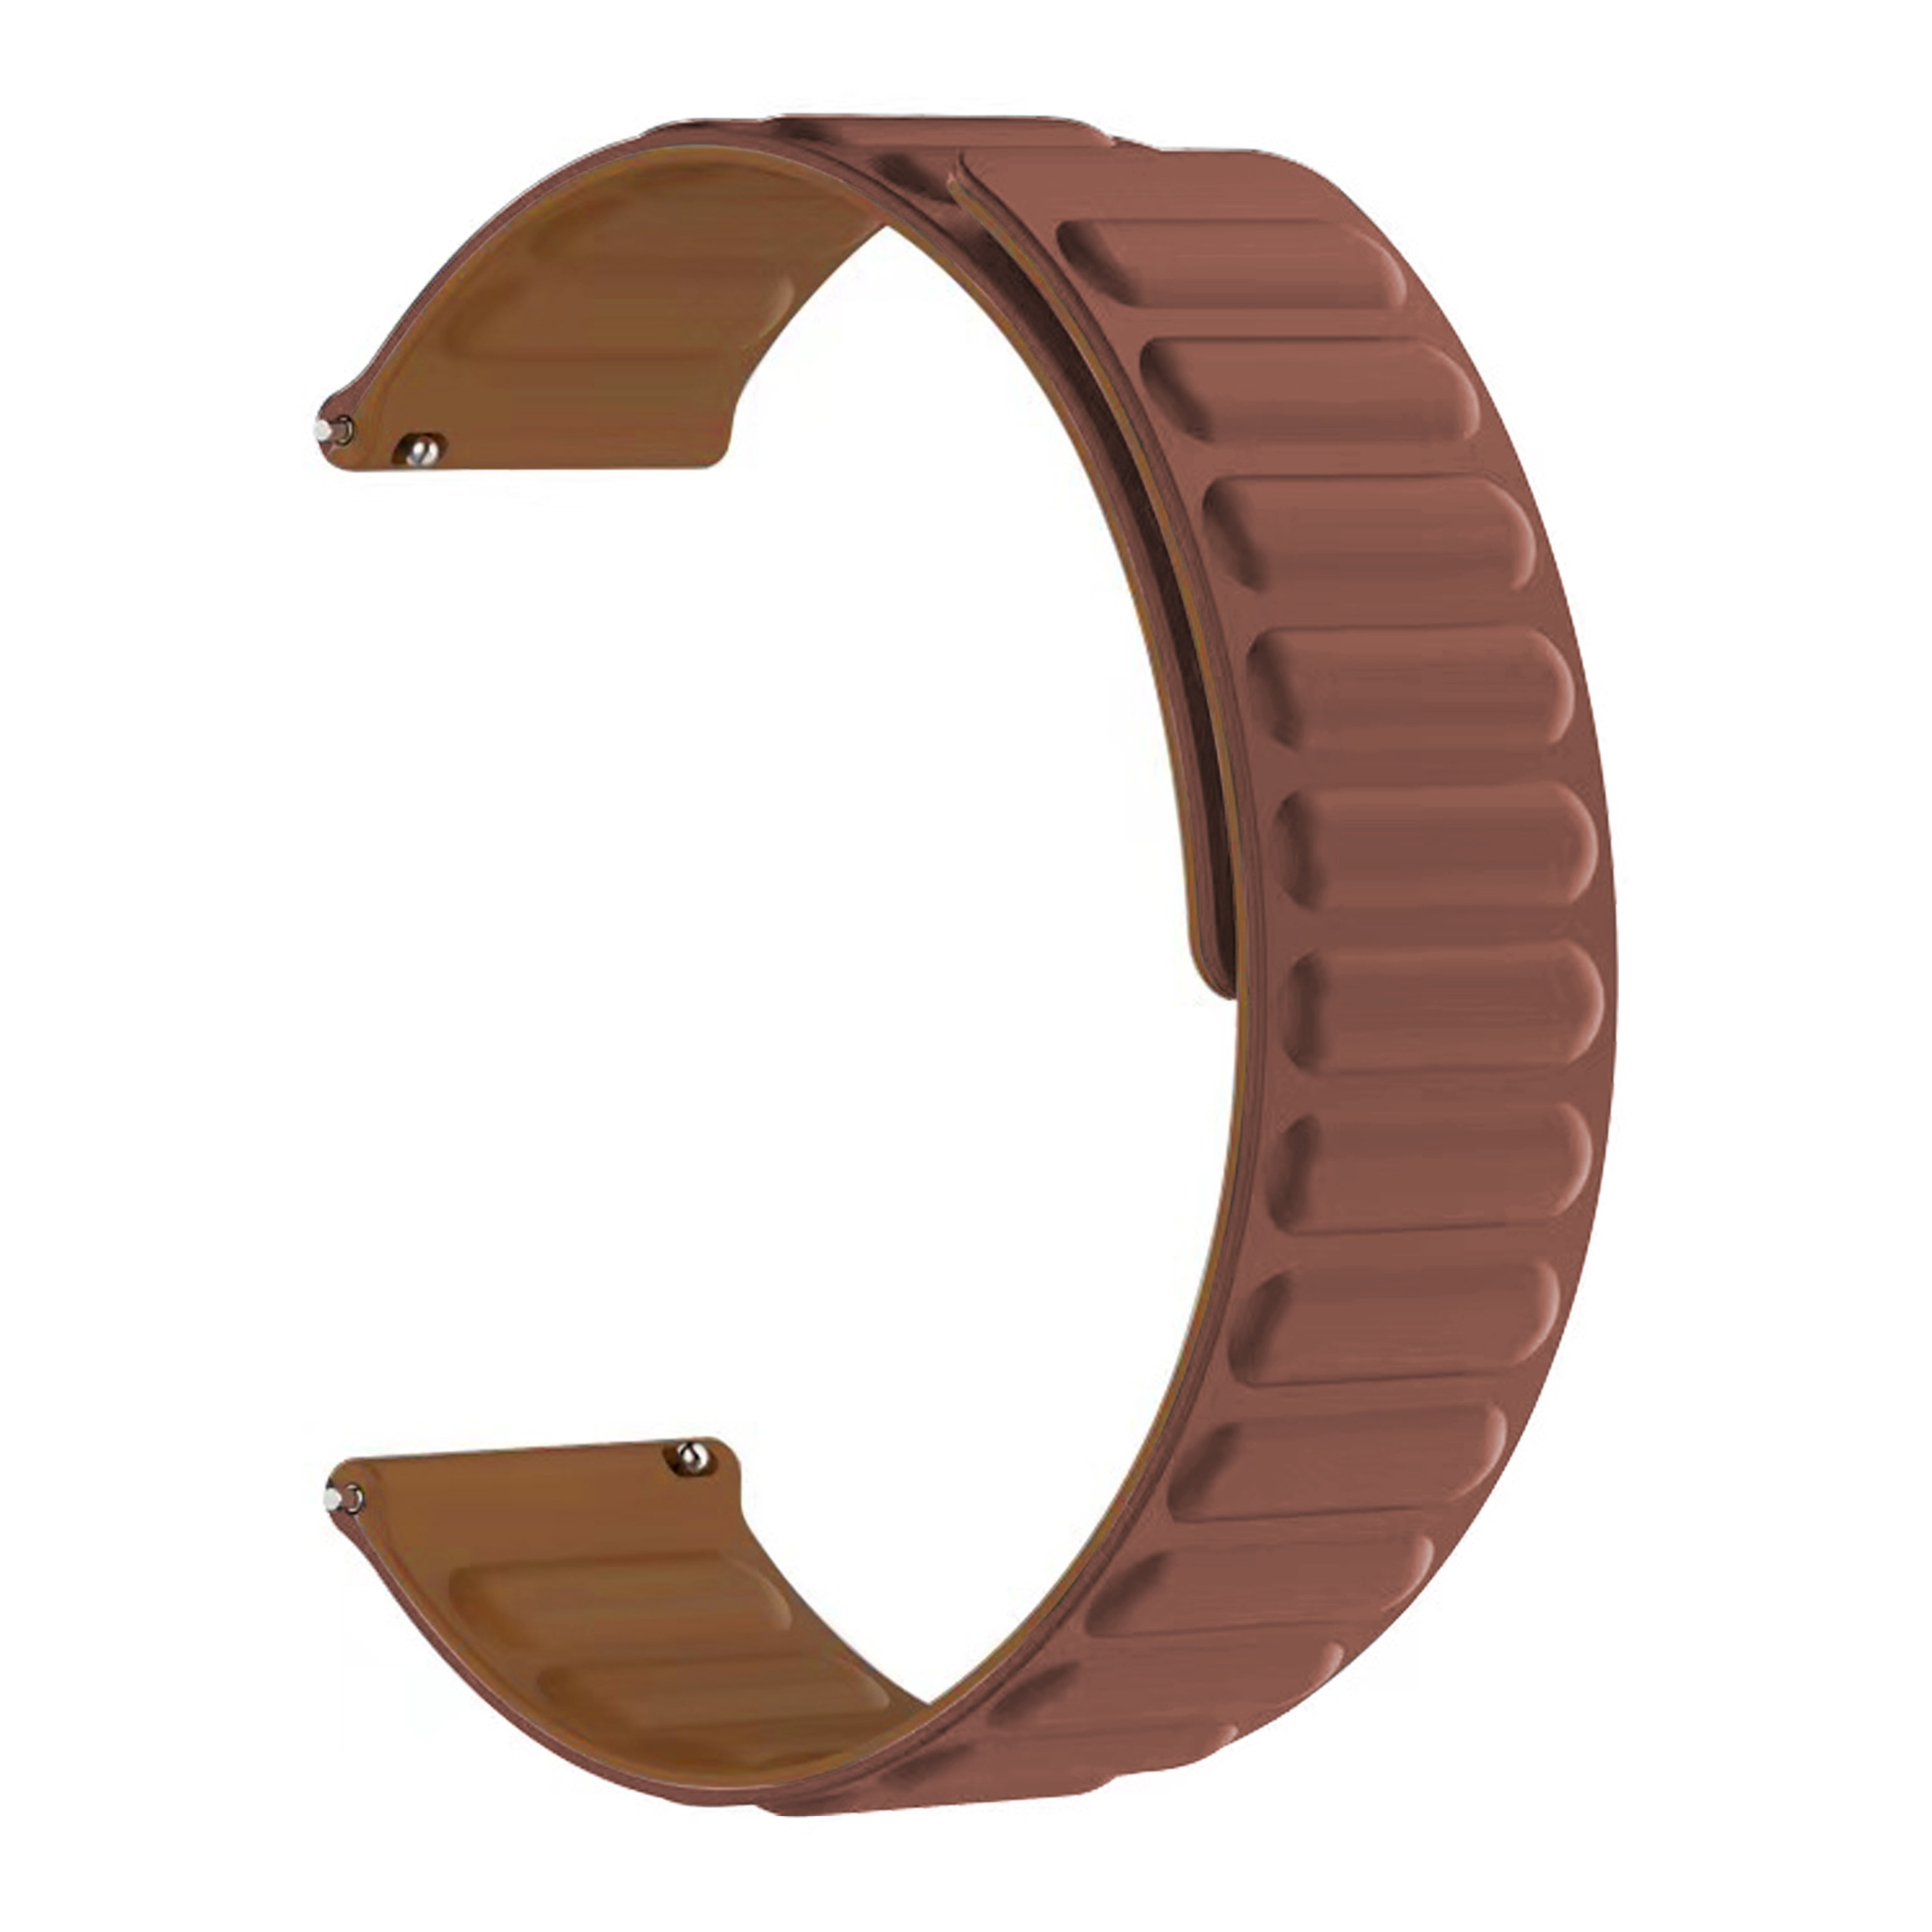 CMF by Nothing Watch Pro Magnetic Silicone Band Brown